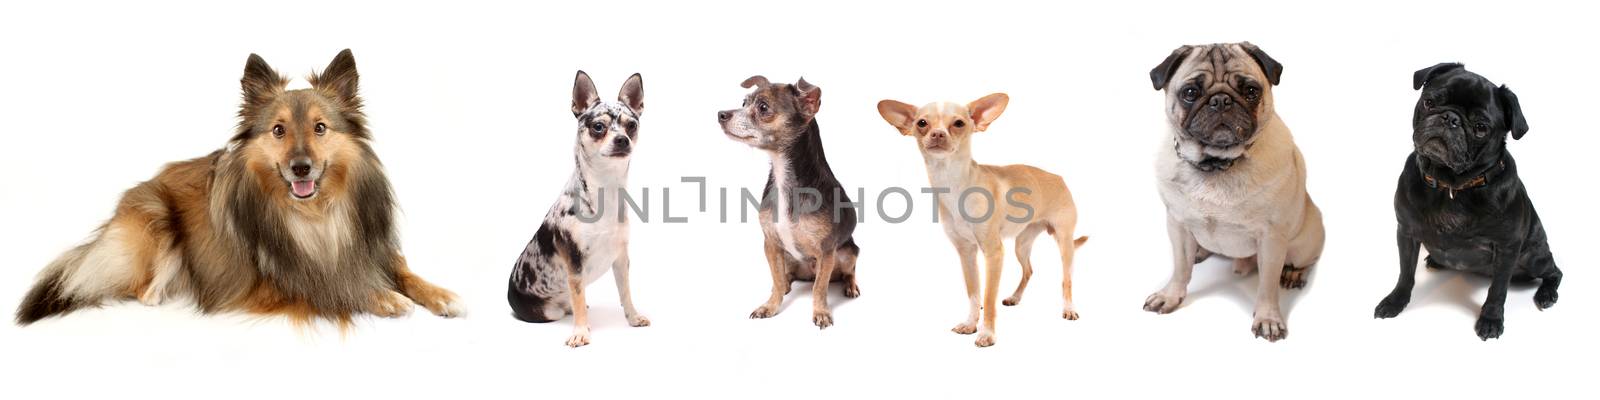 Banner like image of small dog breeds like Sheltie, Chihuahua and Pugs on a white background